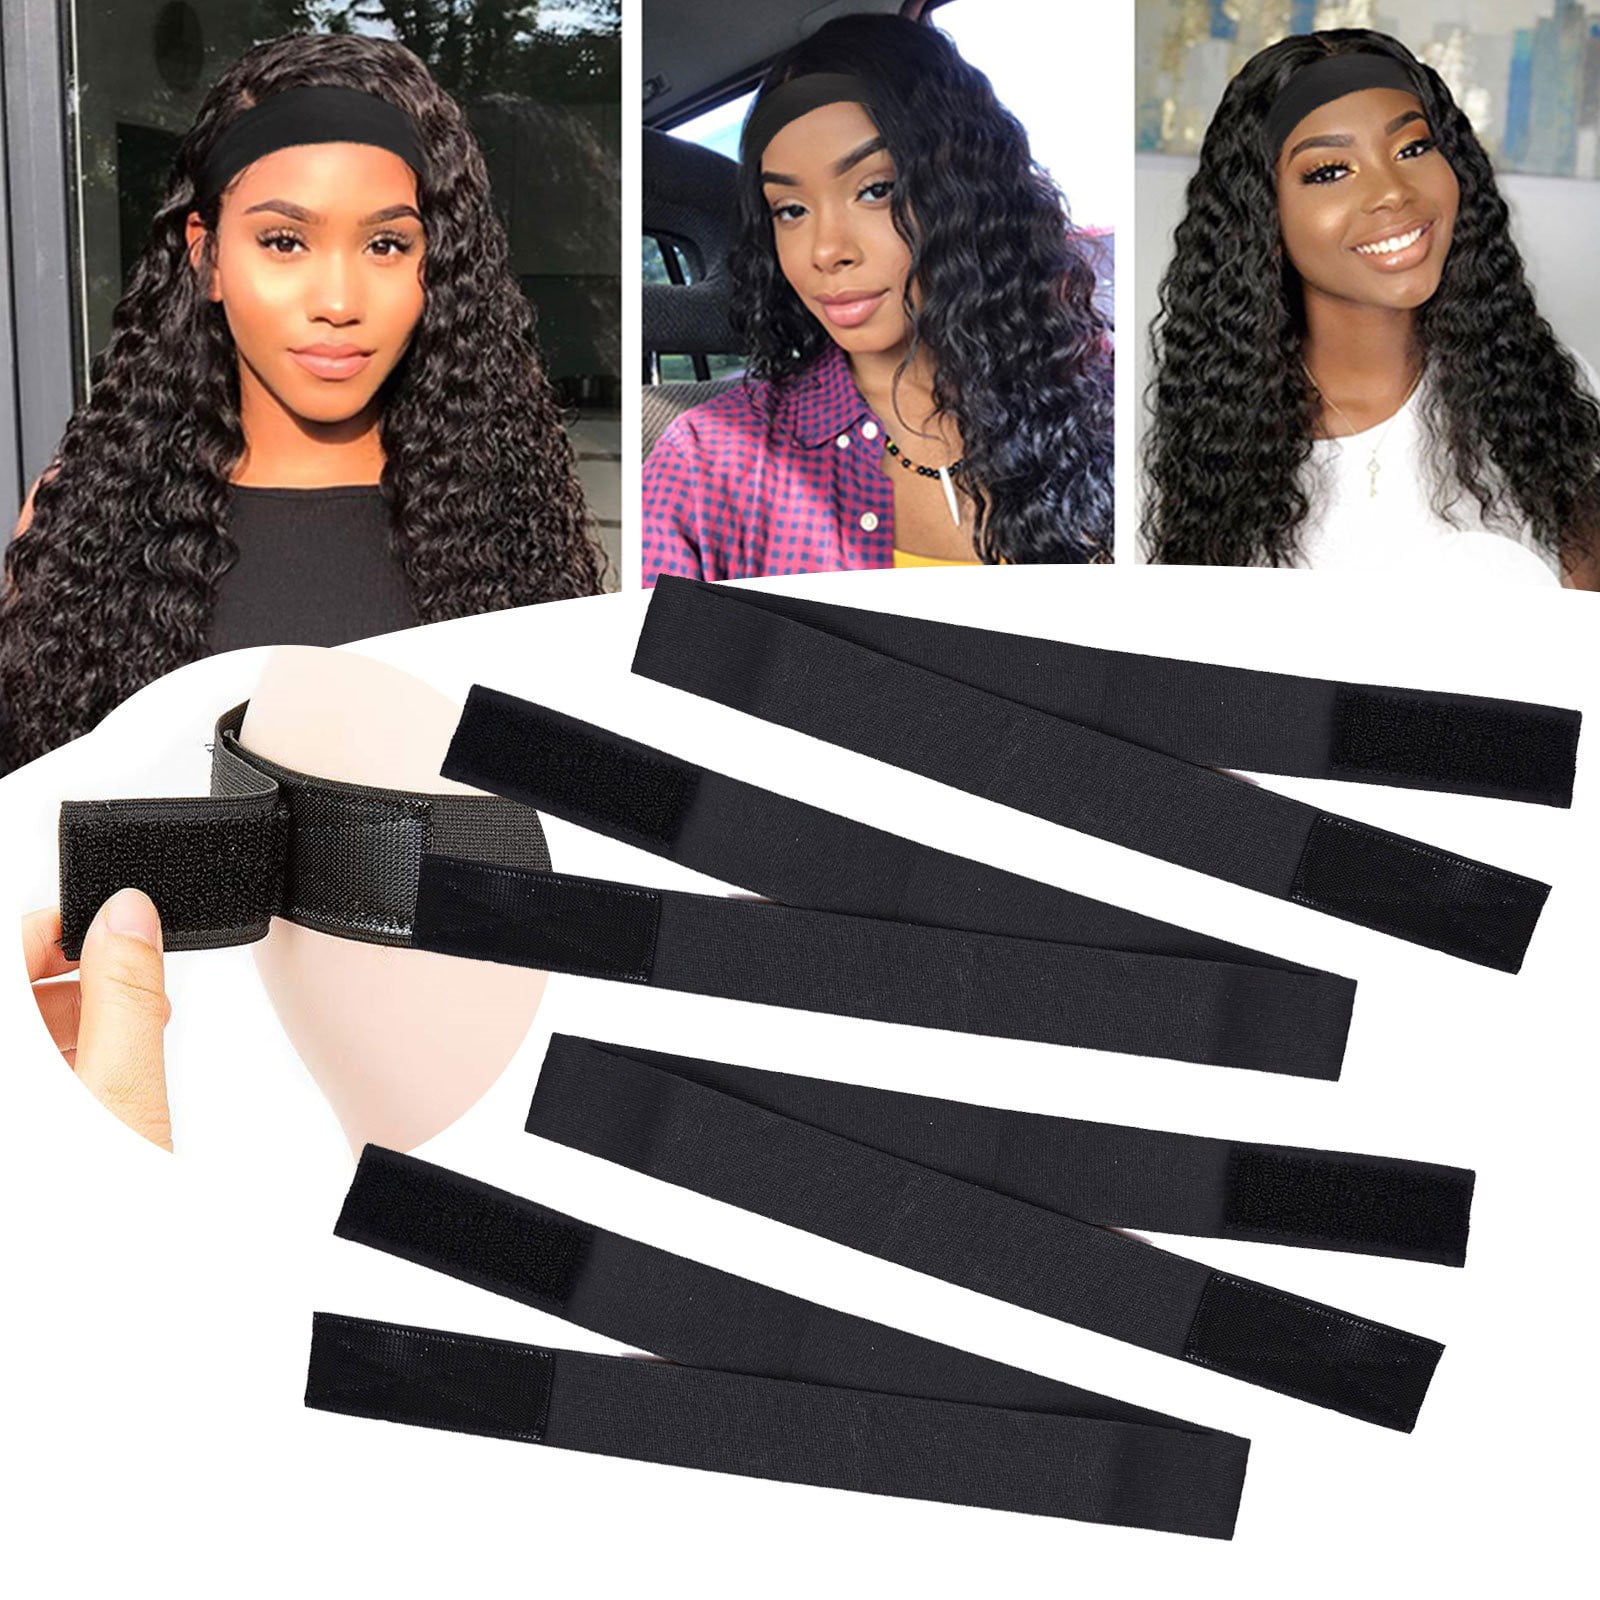 WNG Elastic Band for Lace Frontal Melt,Lace Melting Band for Lace